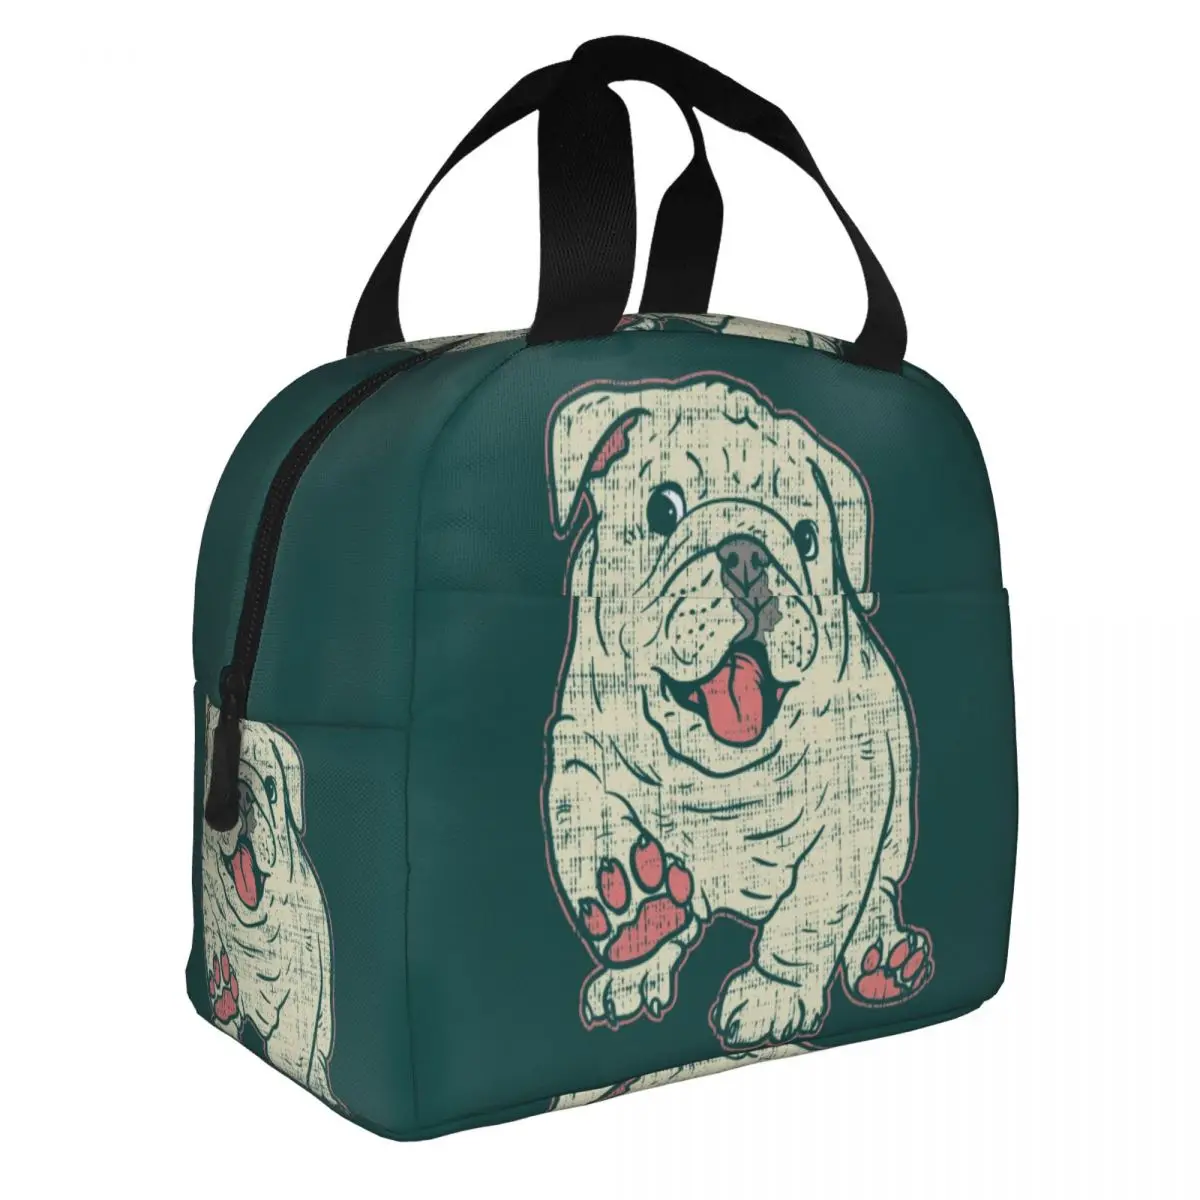 

Cute English Bulldog Insulated Lunch Bag for Women British Pet Dog Resuable Thermal Cooler Bento Box Camping Travel Food Bags